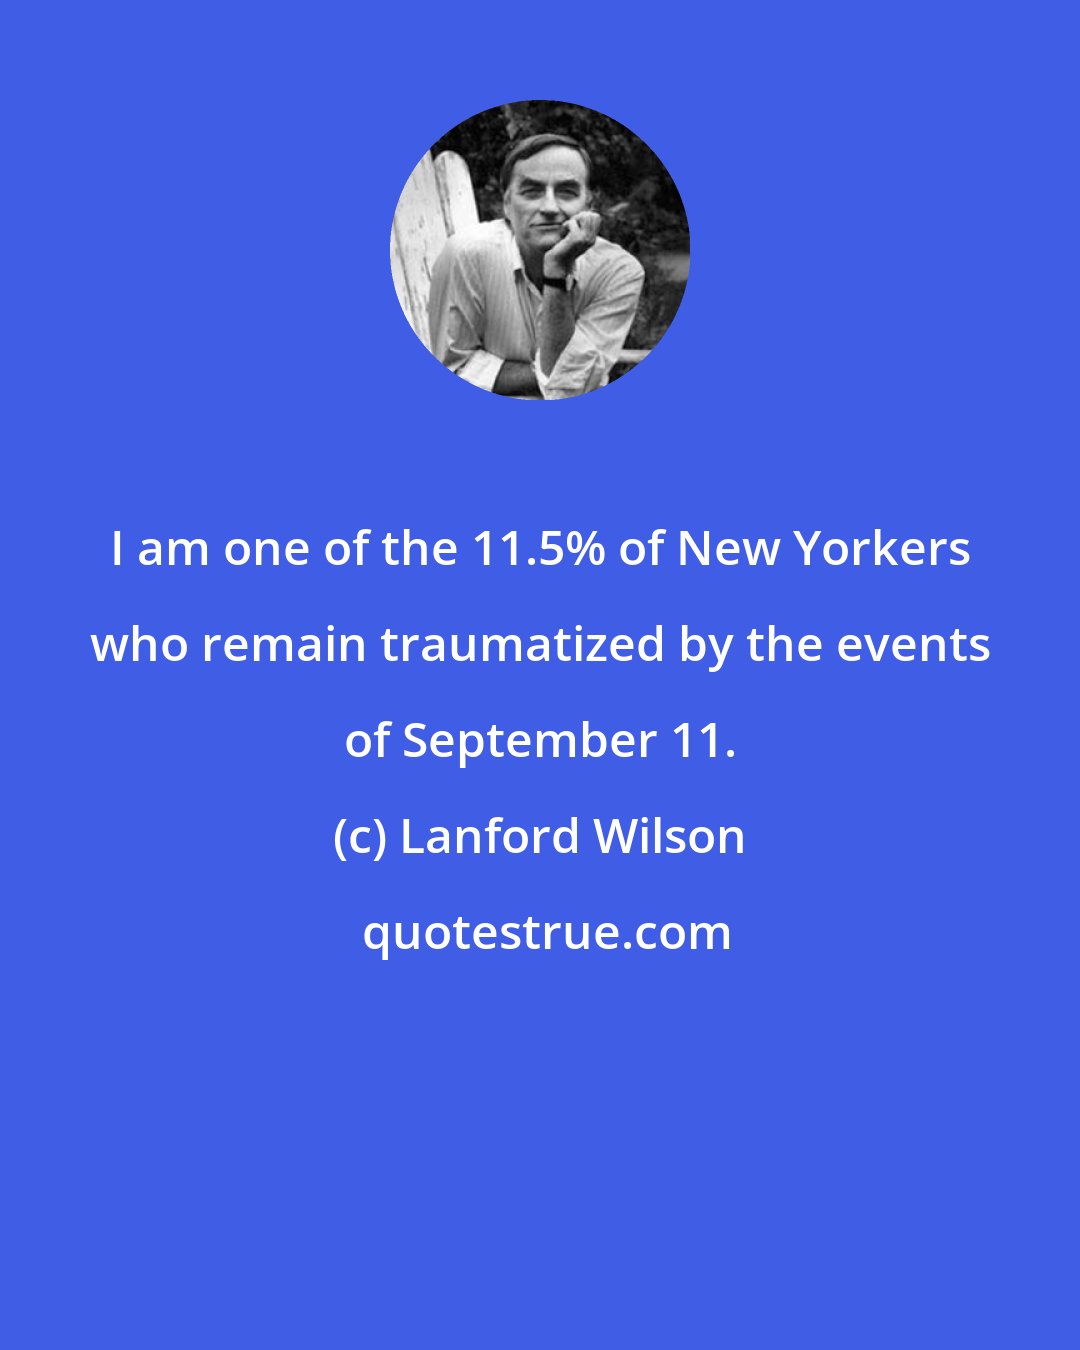 Lanford Wilson: I am one of the 11.5% of New Yorkers who remain traumatized by the events of September 11.